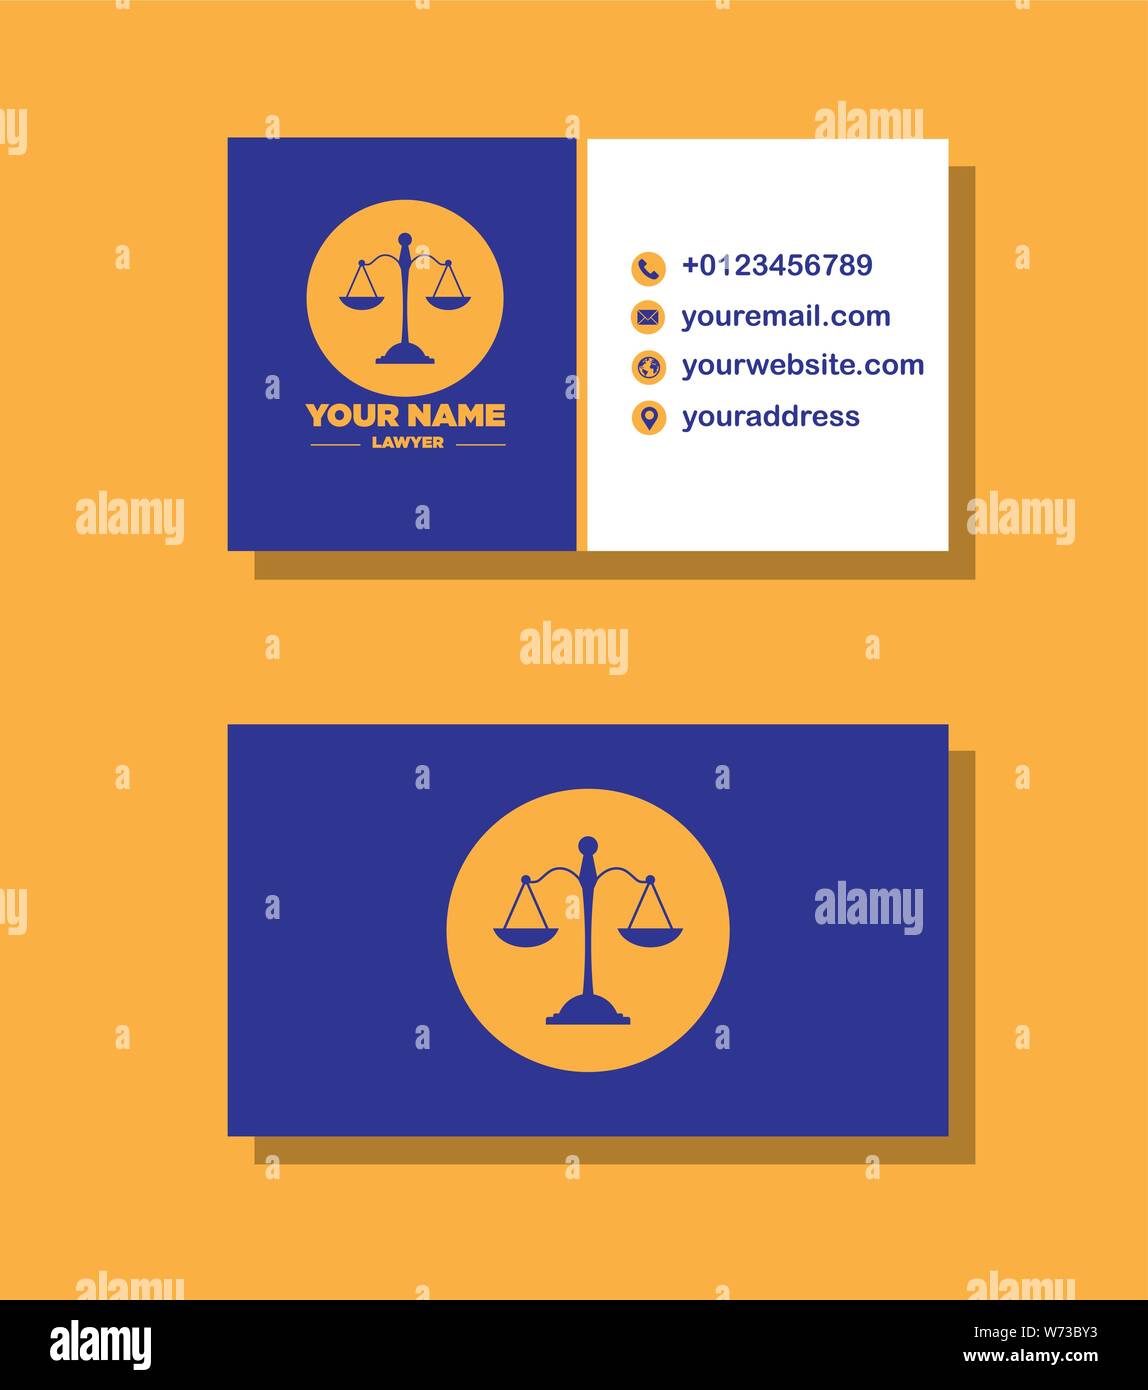 Civil lawyer Stock Vector Images - Alamy